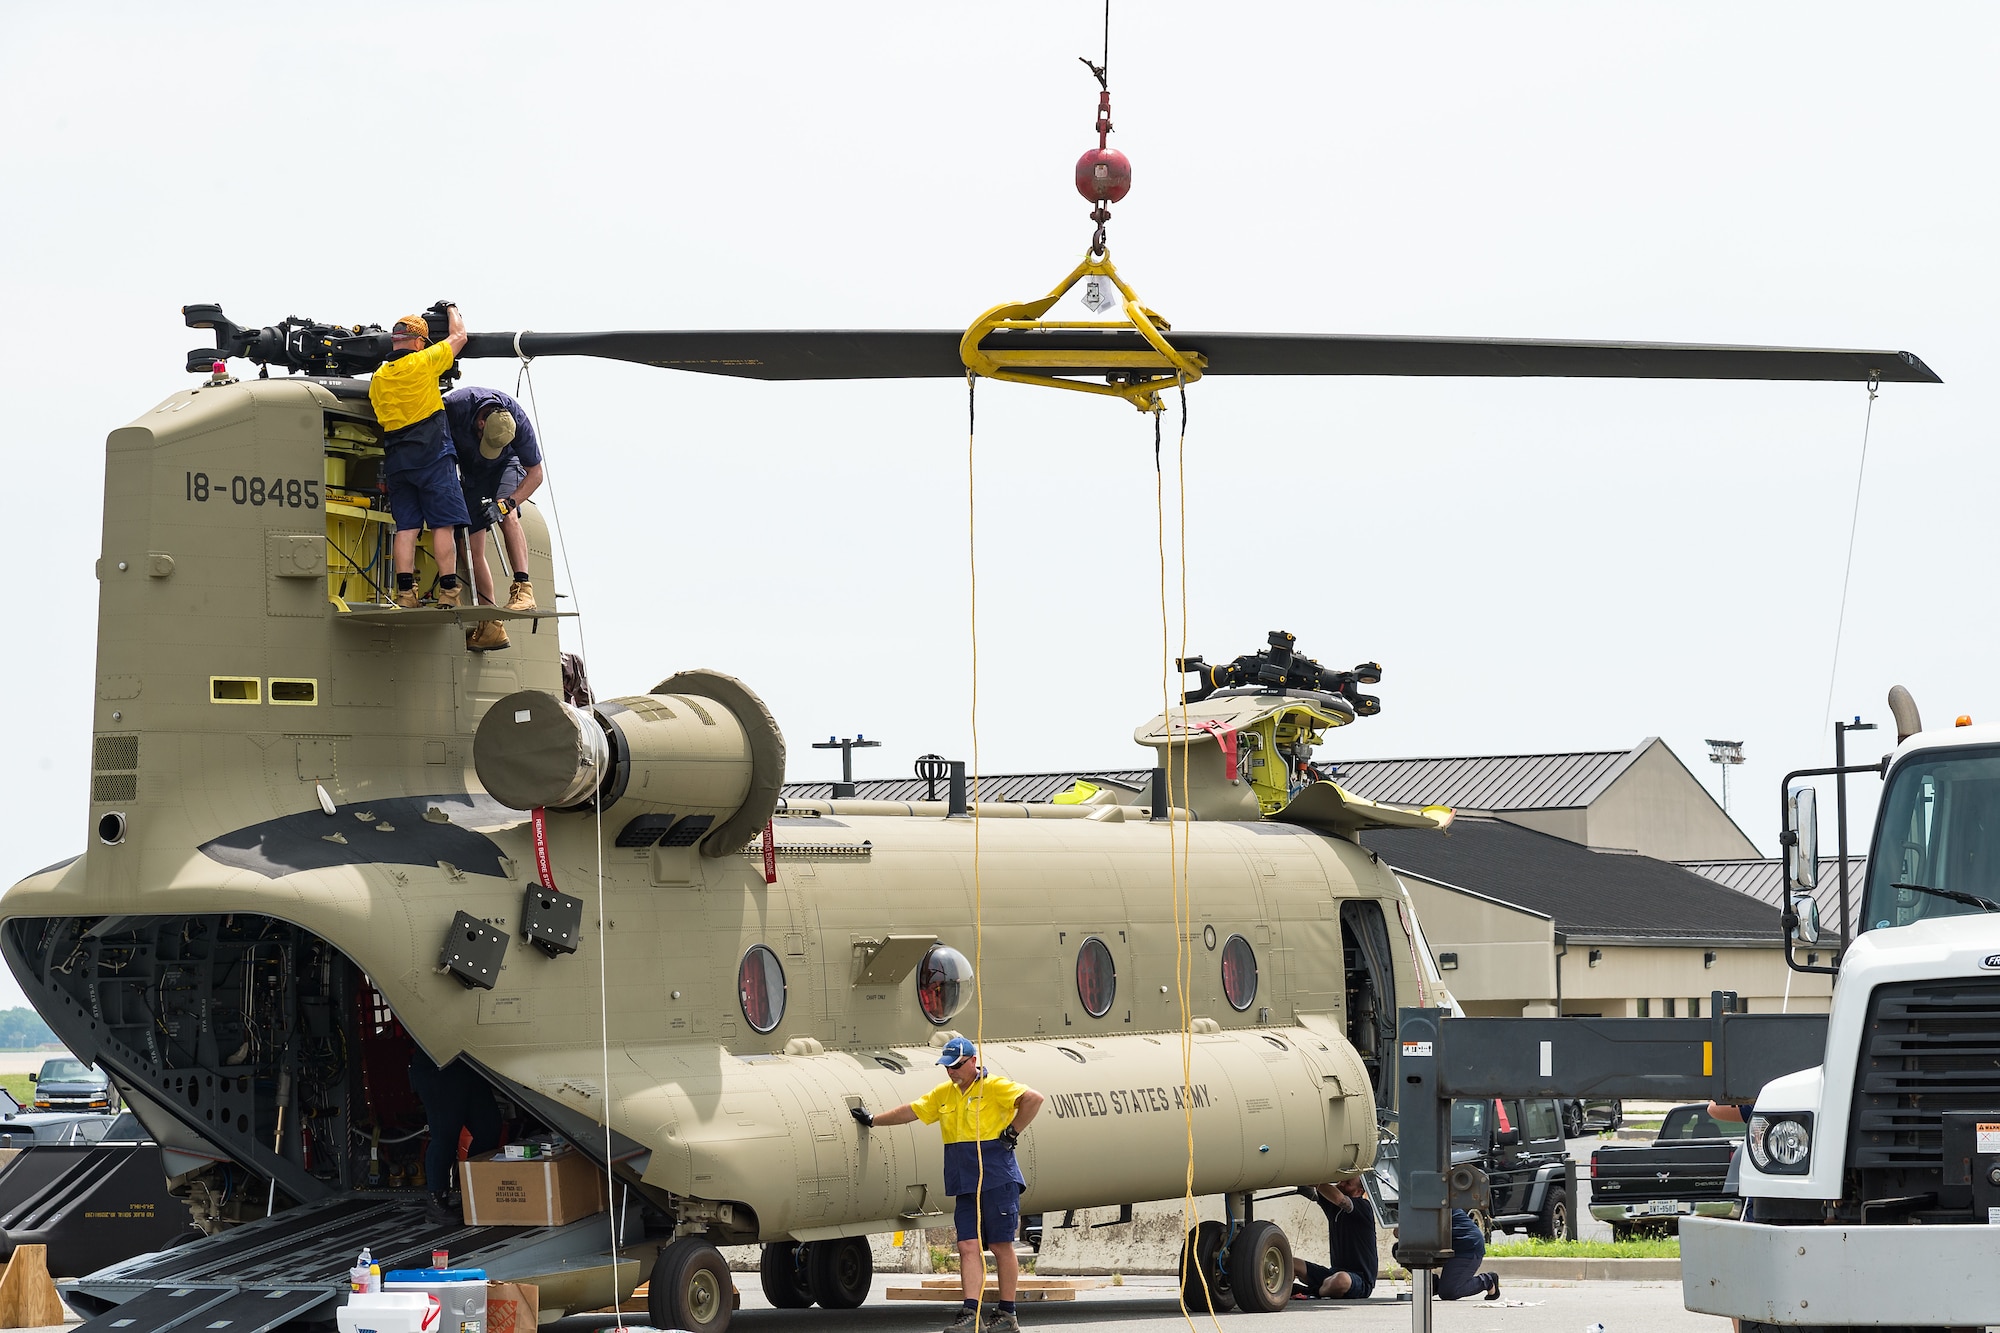 Boeing Defence Australia maintenance team members prepare a CH-47F Chinook helicopter for shipment at Dover Air Force Base, Delaware, June 9, 2021. BDA maintenance personnel readied two Chinooks for shipment aboard a C-5M Super Galaxy as part of the U.S. government’s foreign military sales program. The U.S.-Australia alliance is an anchor for peace and stability in the Indo-Pacific region and around the world. (U.S. Air Force photo by Roland Balik)